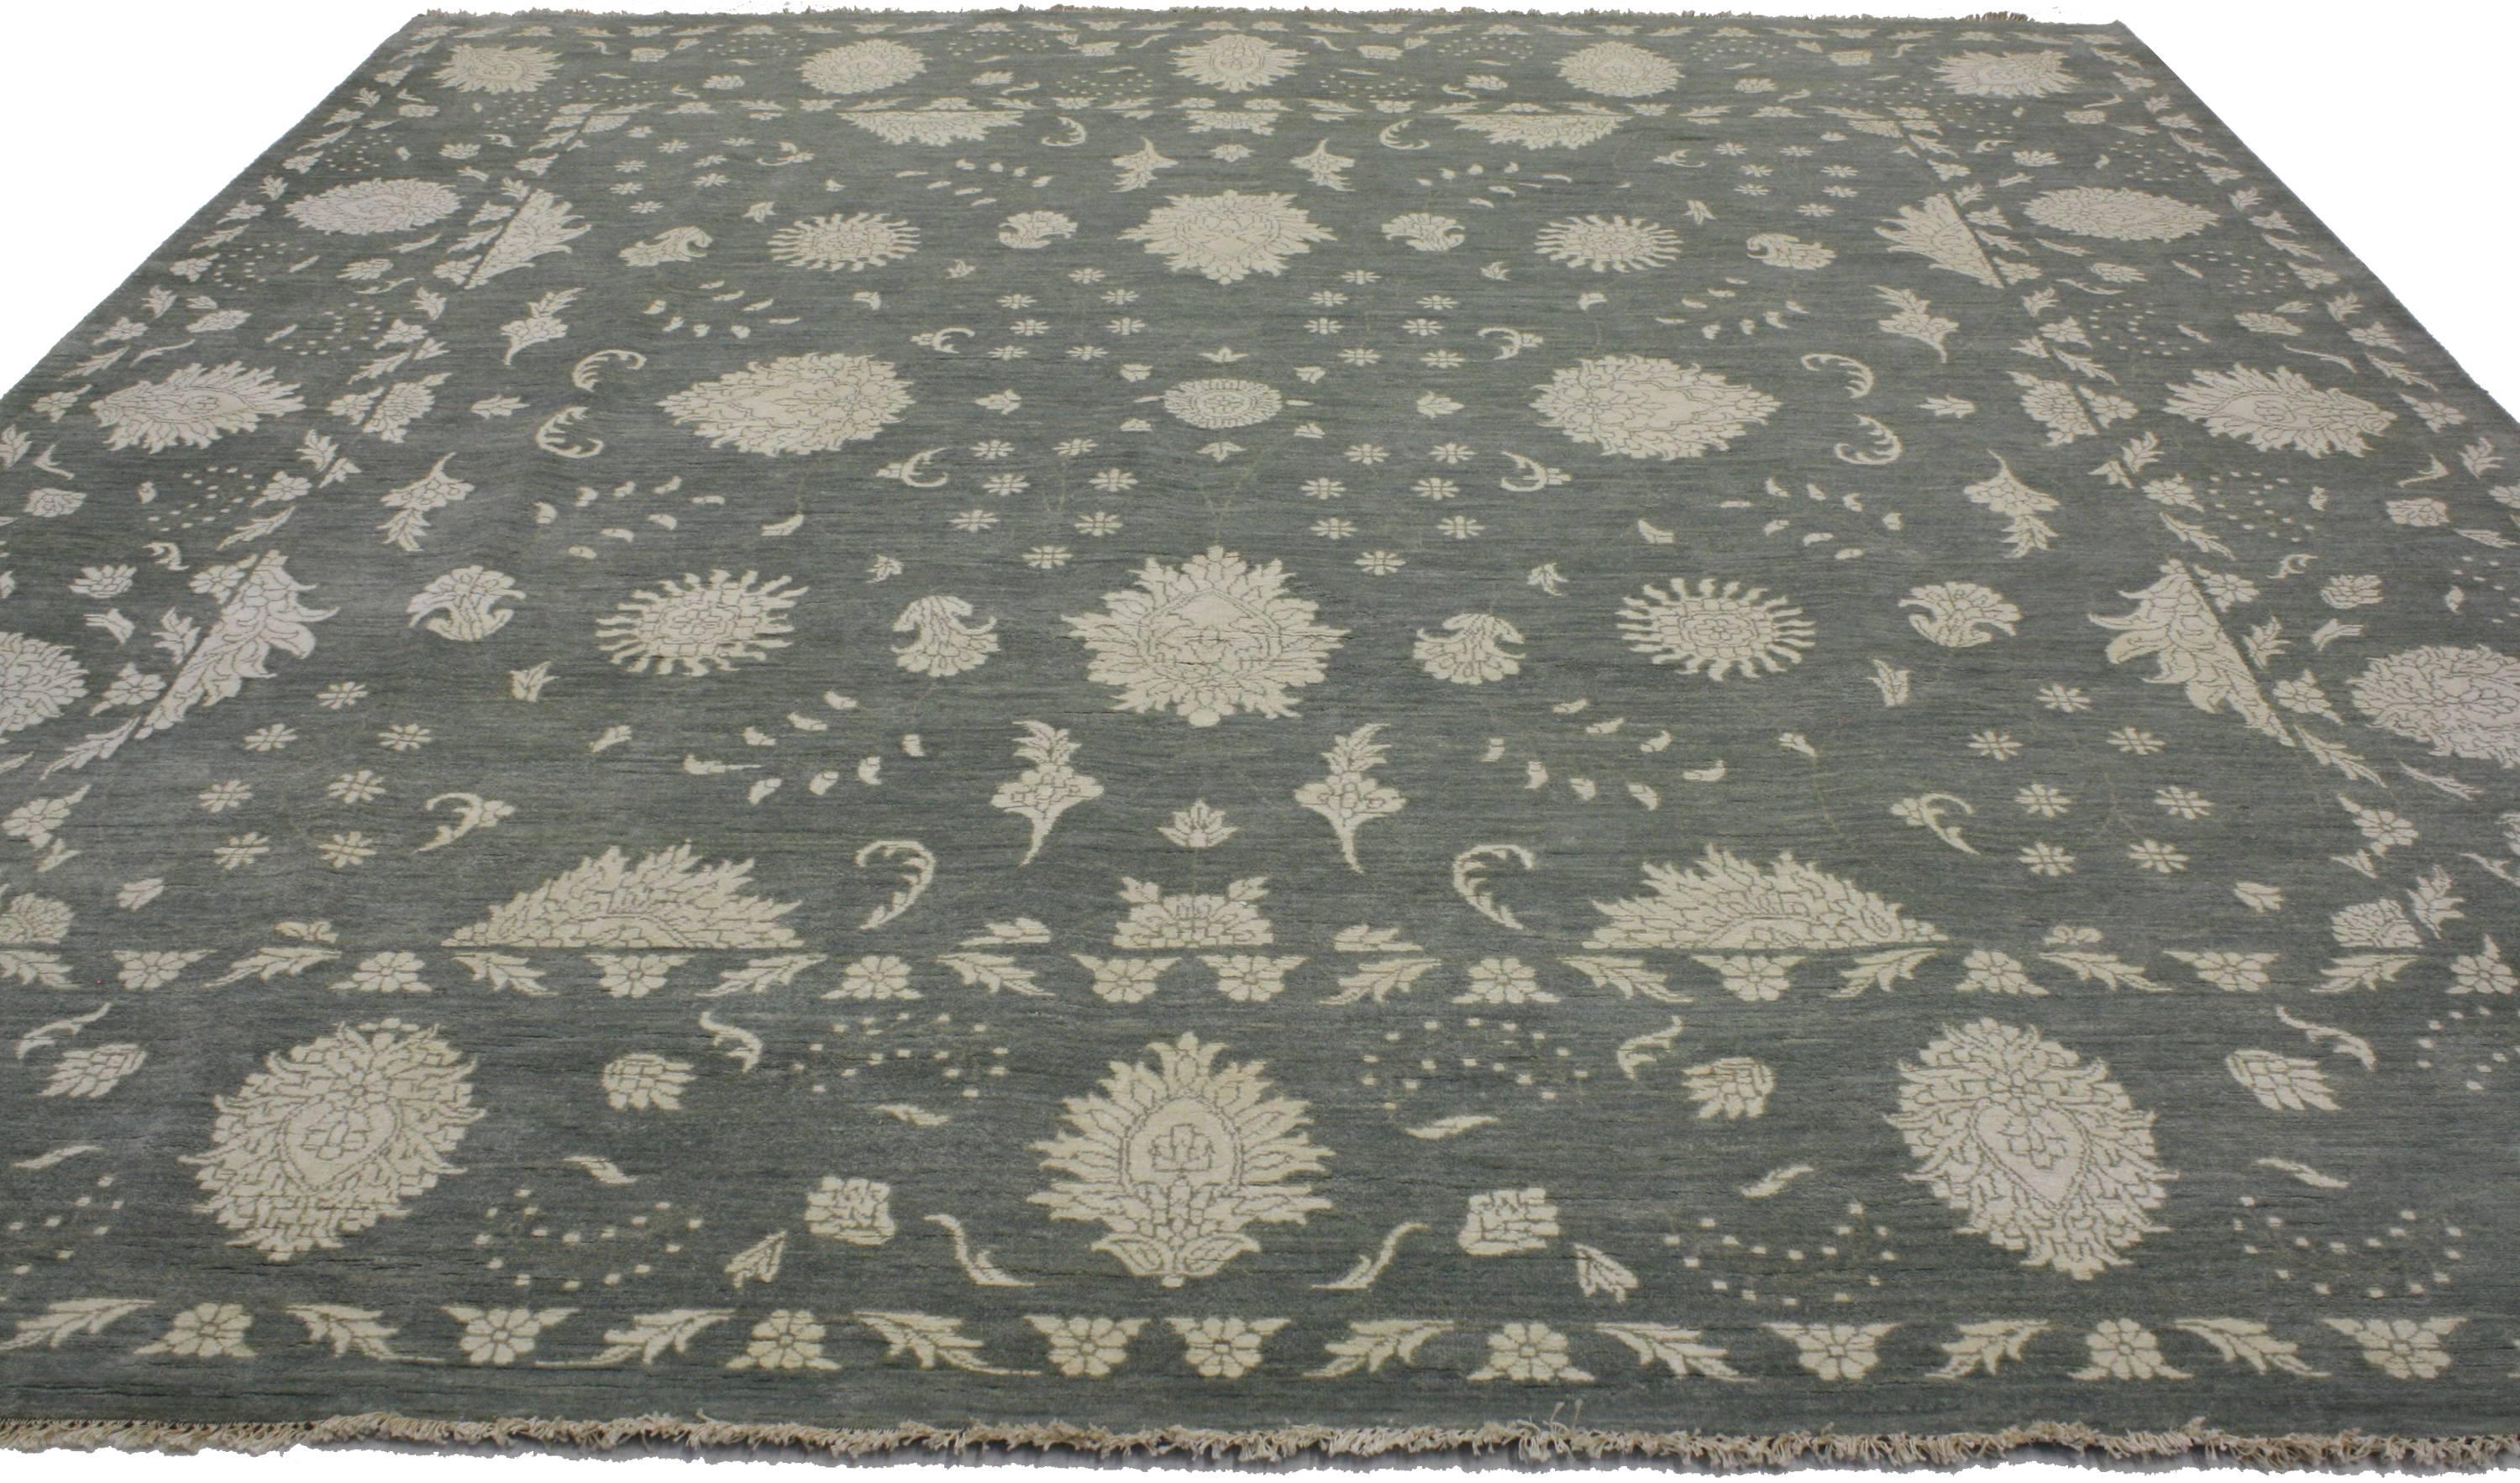 Indian Transitional Dark Gray Oushak Style Rug with Modern Glamour Design